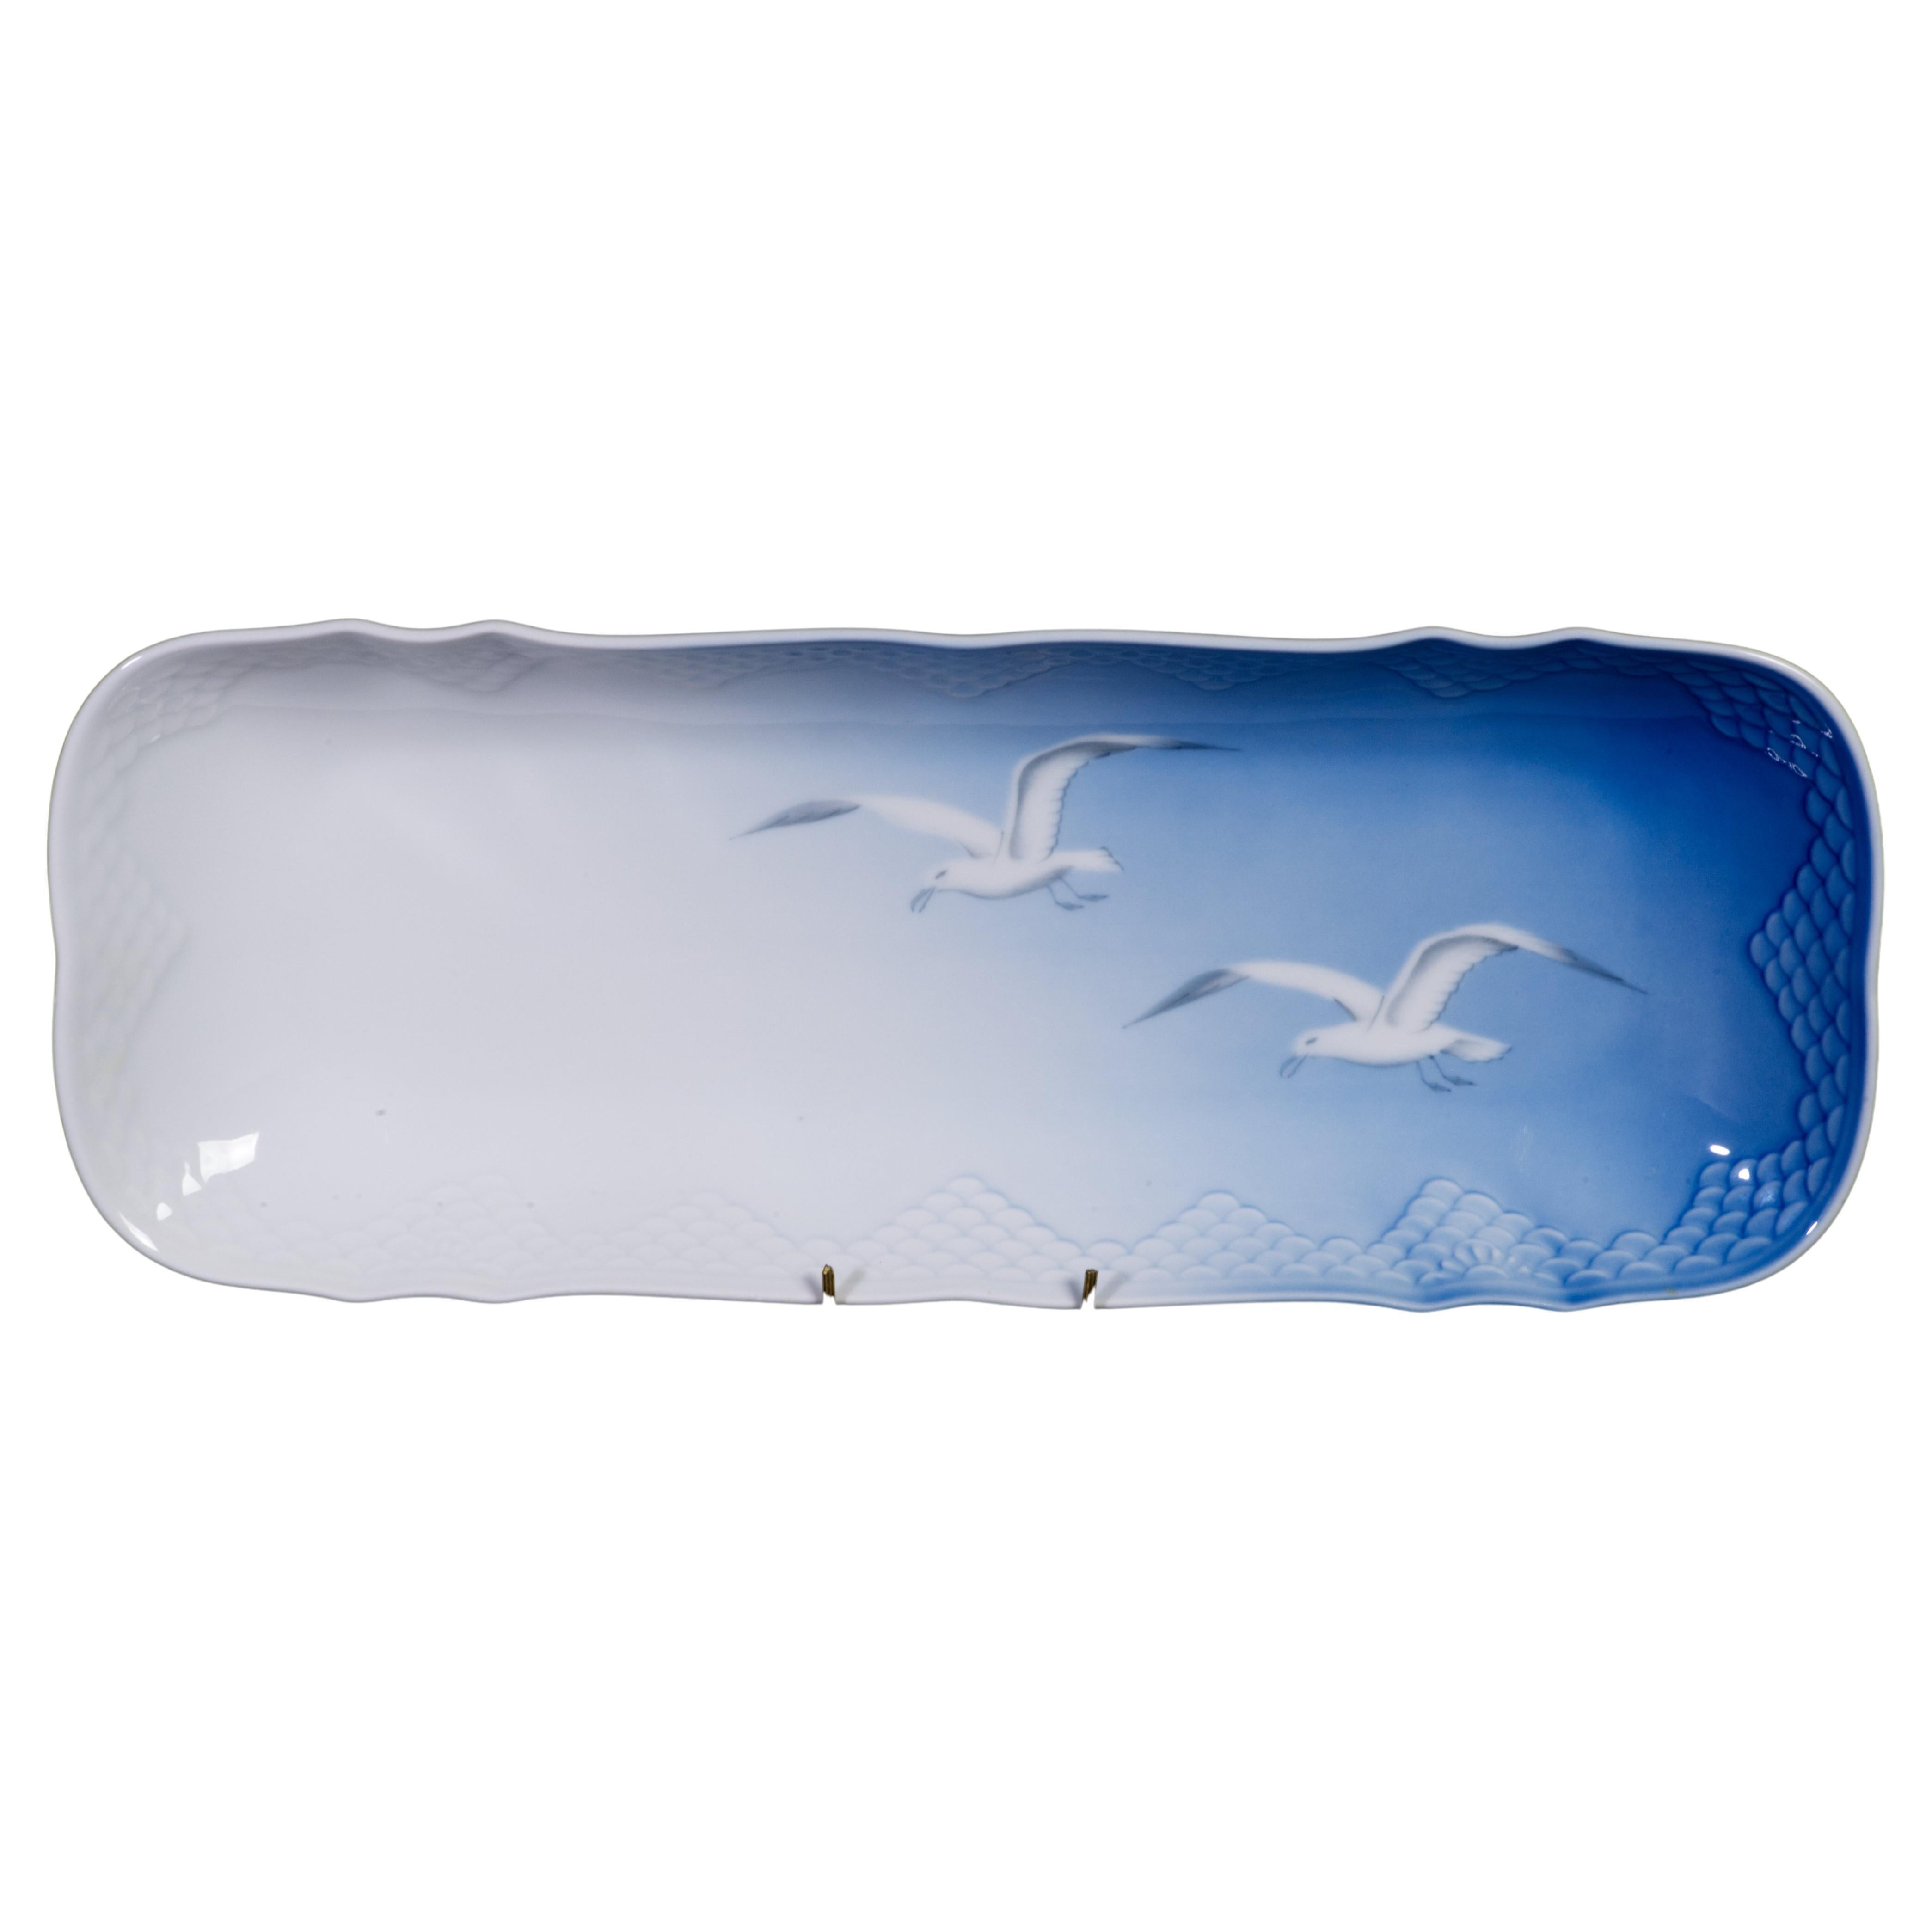 Rare Bing & Grondahl Seagull sandwich tray or service platter For Sale